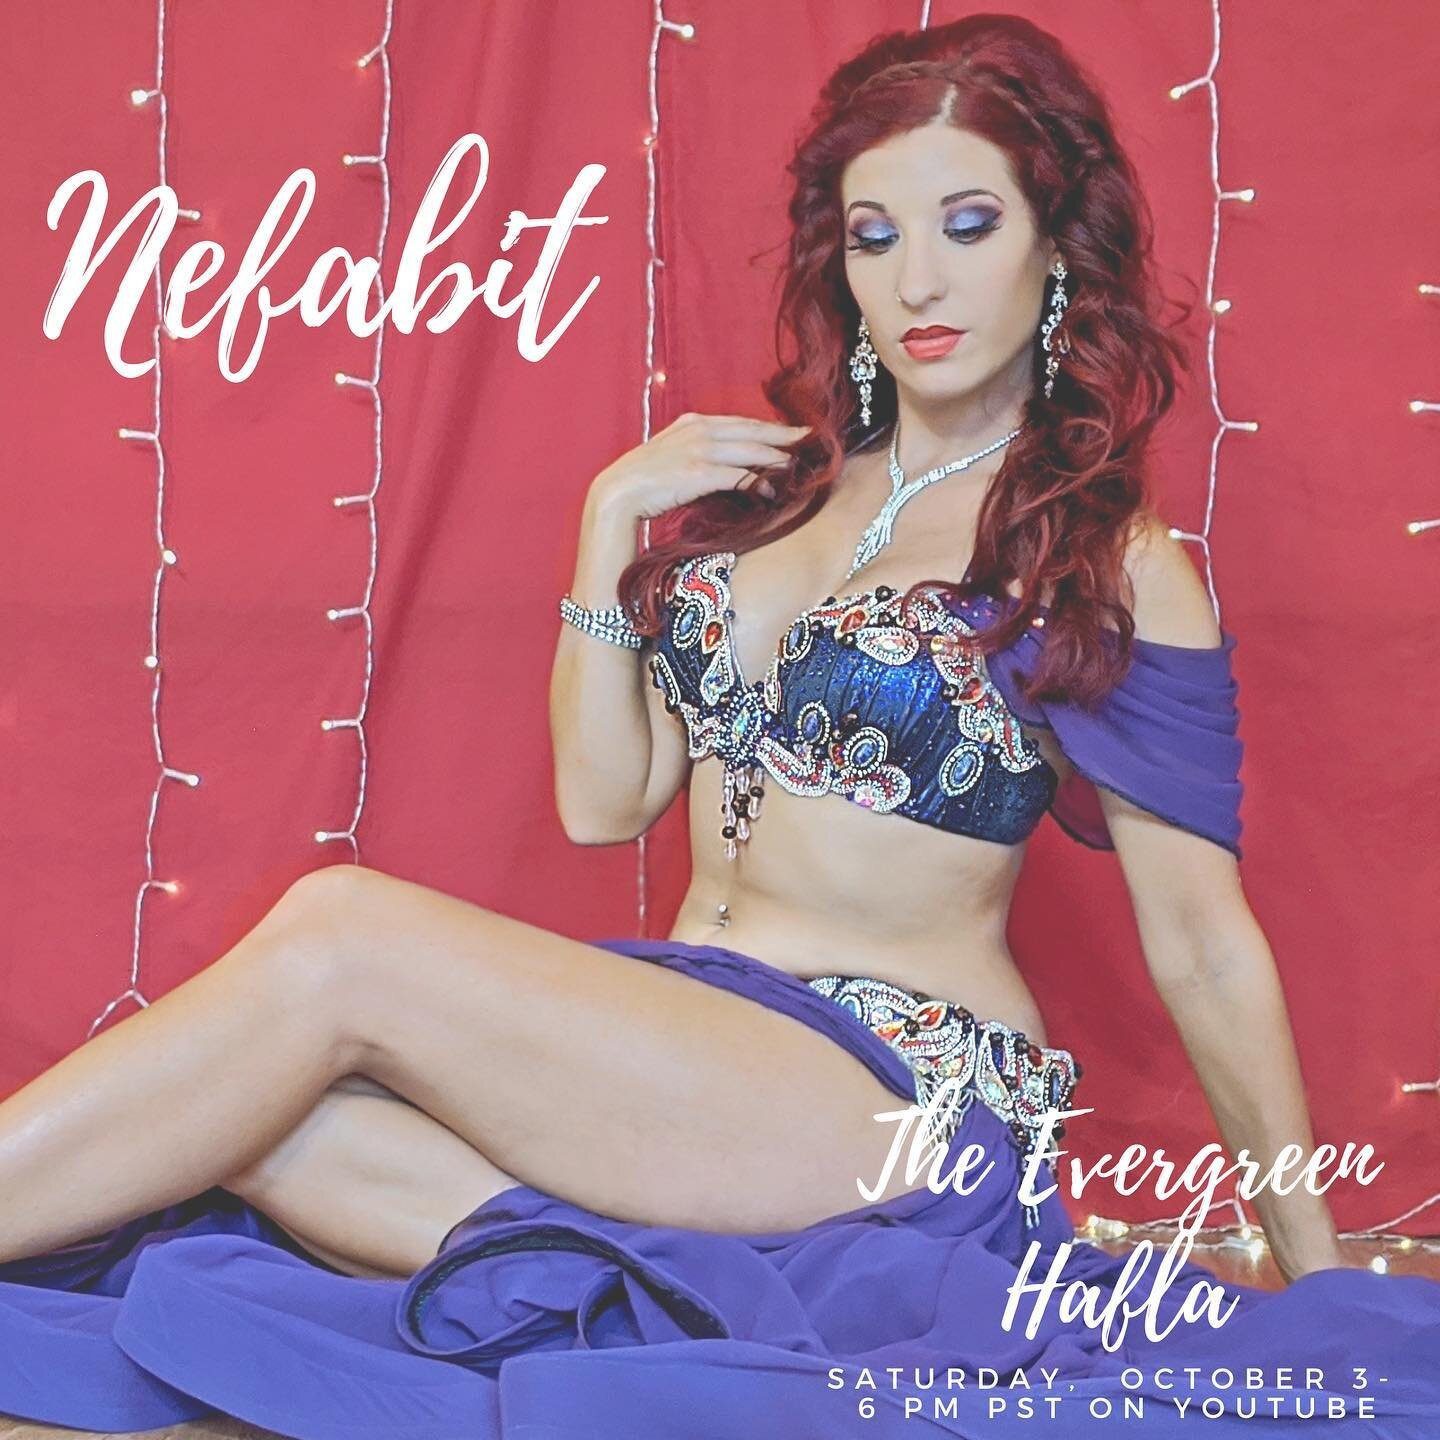 The lovely @nefabit will be joining us also! So happy to have discovered her in this in between/quarantine time and I know you&rsquo;ll enjoy her dancing.  #evergreenhafla #bellydance #raqssharqi #spokane